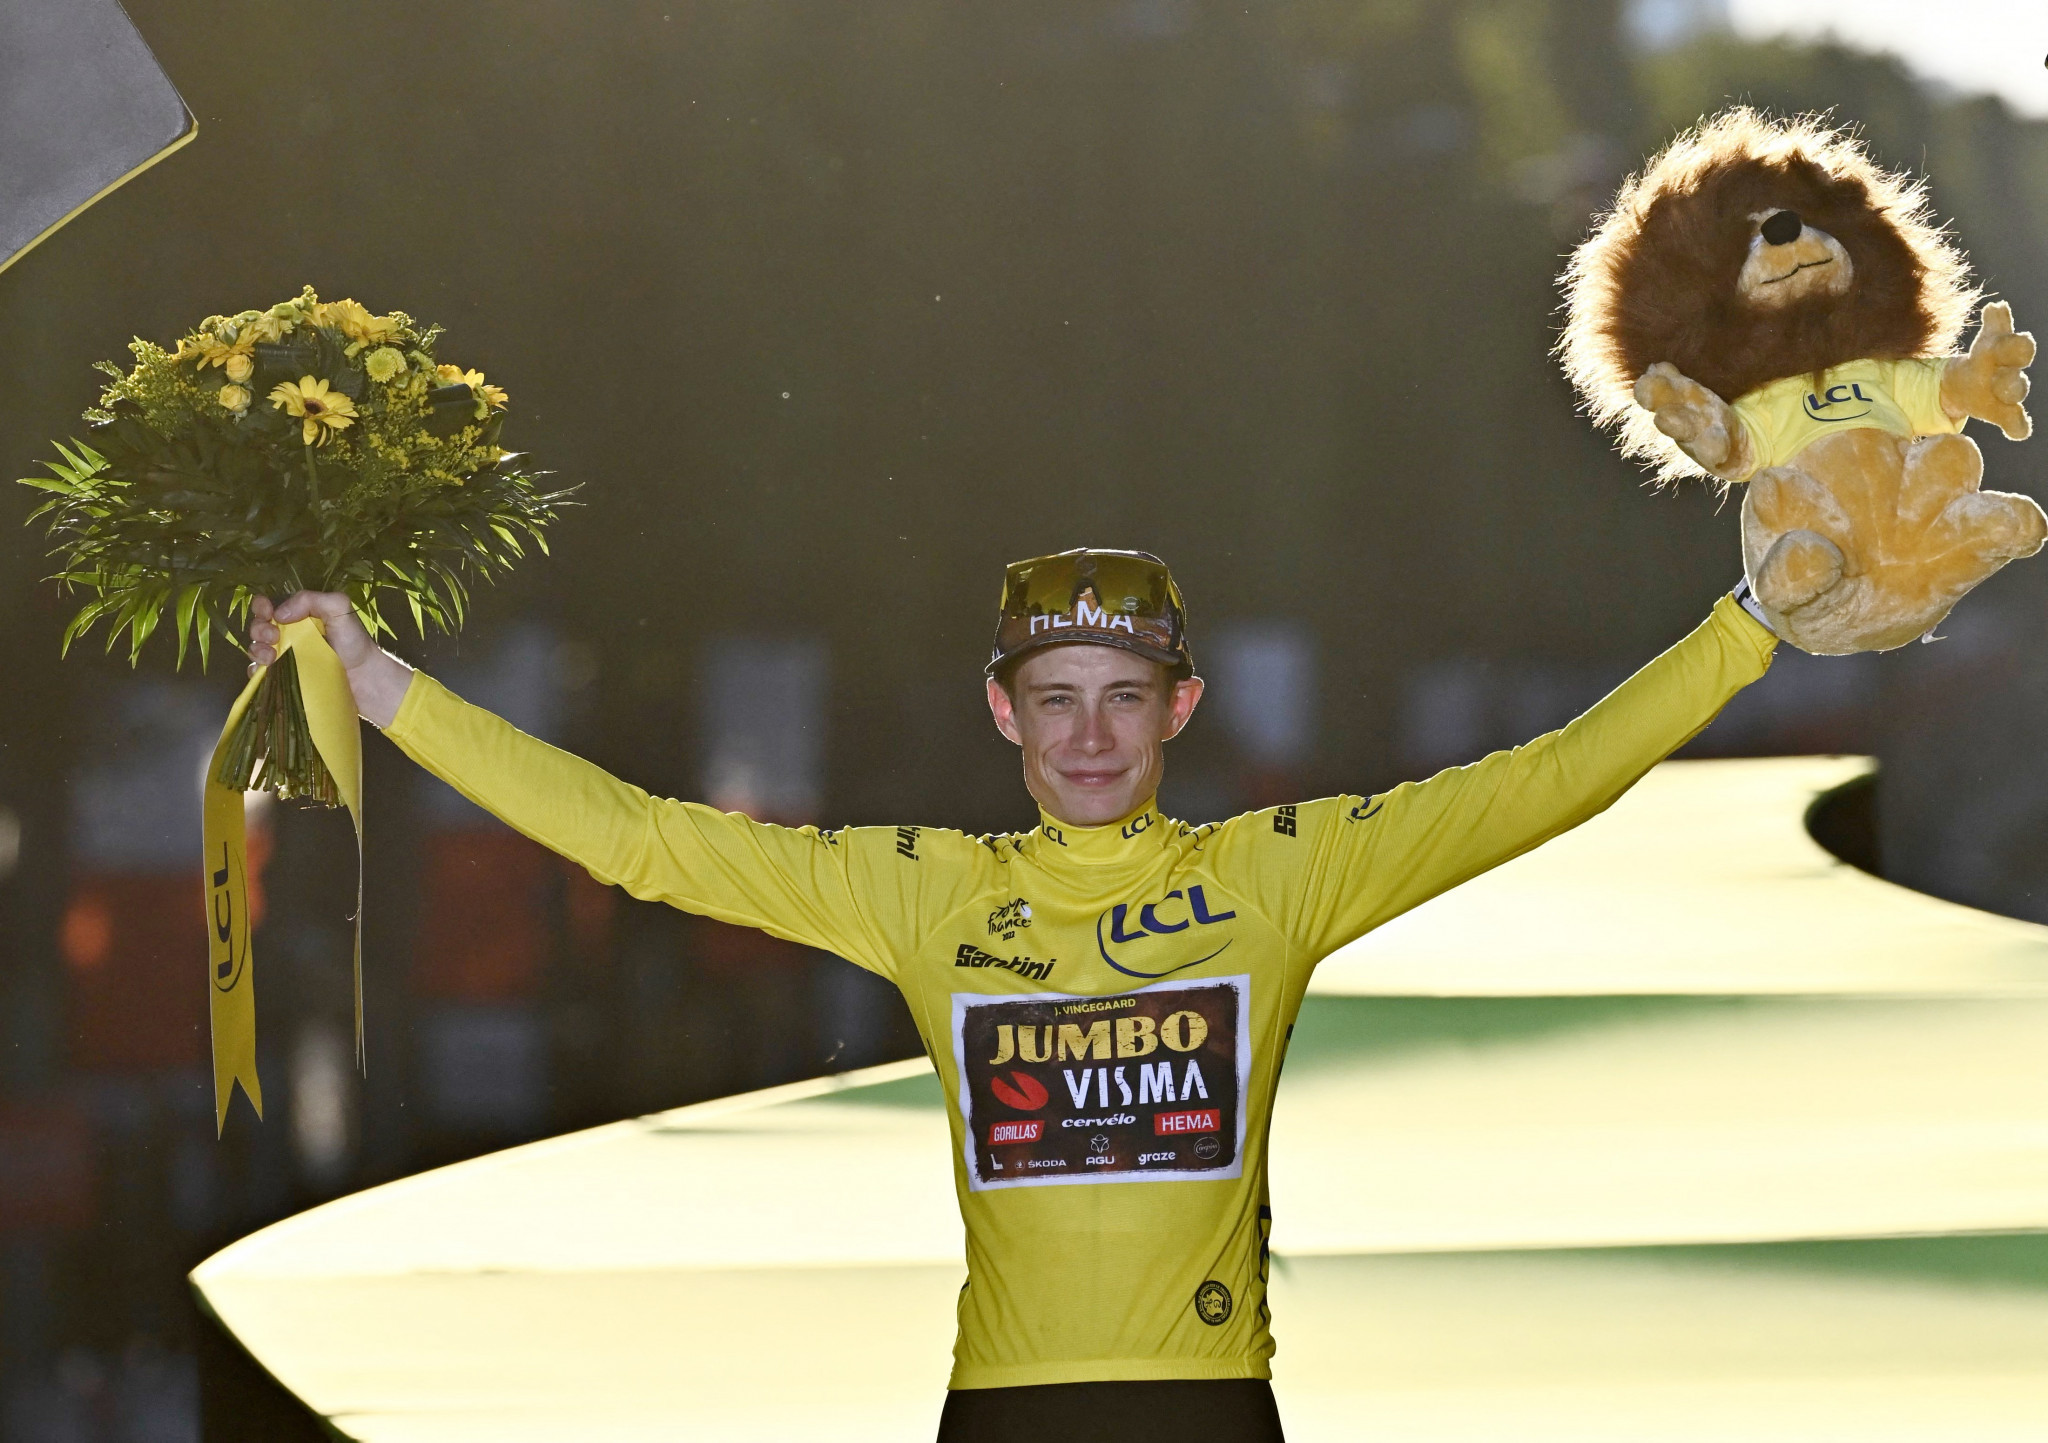 Jonas Vingegaard was crowned Tour de France champion after a stunning performance ©Getty Images